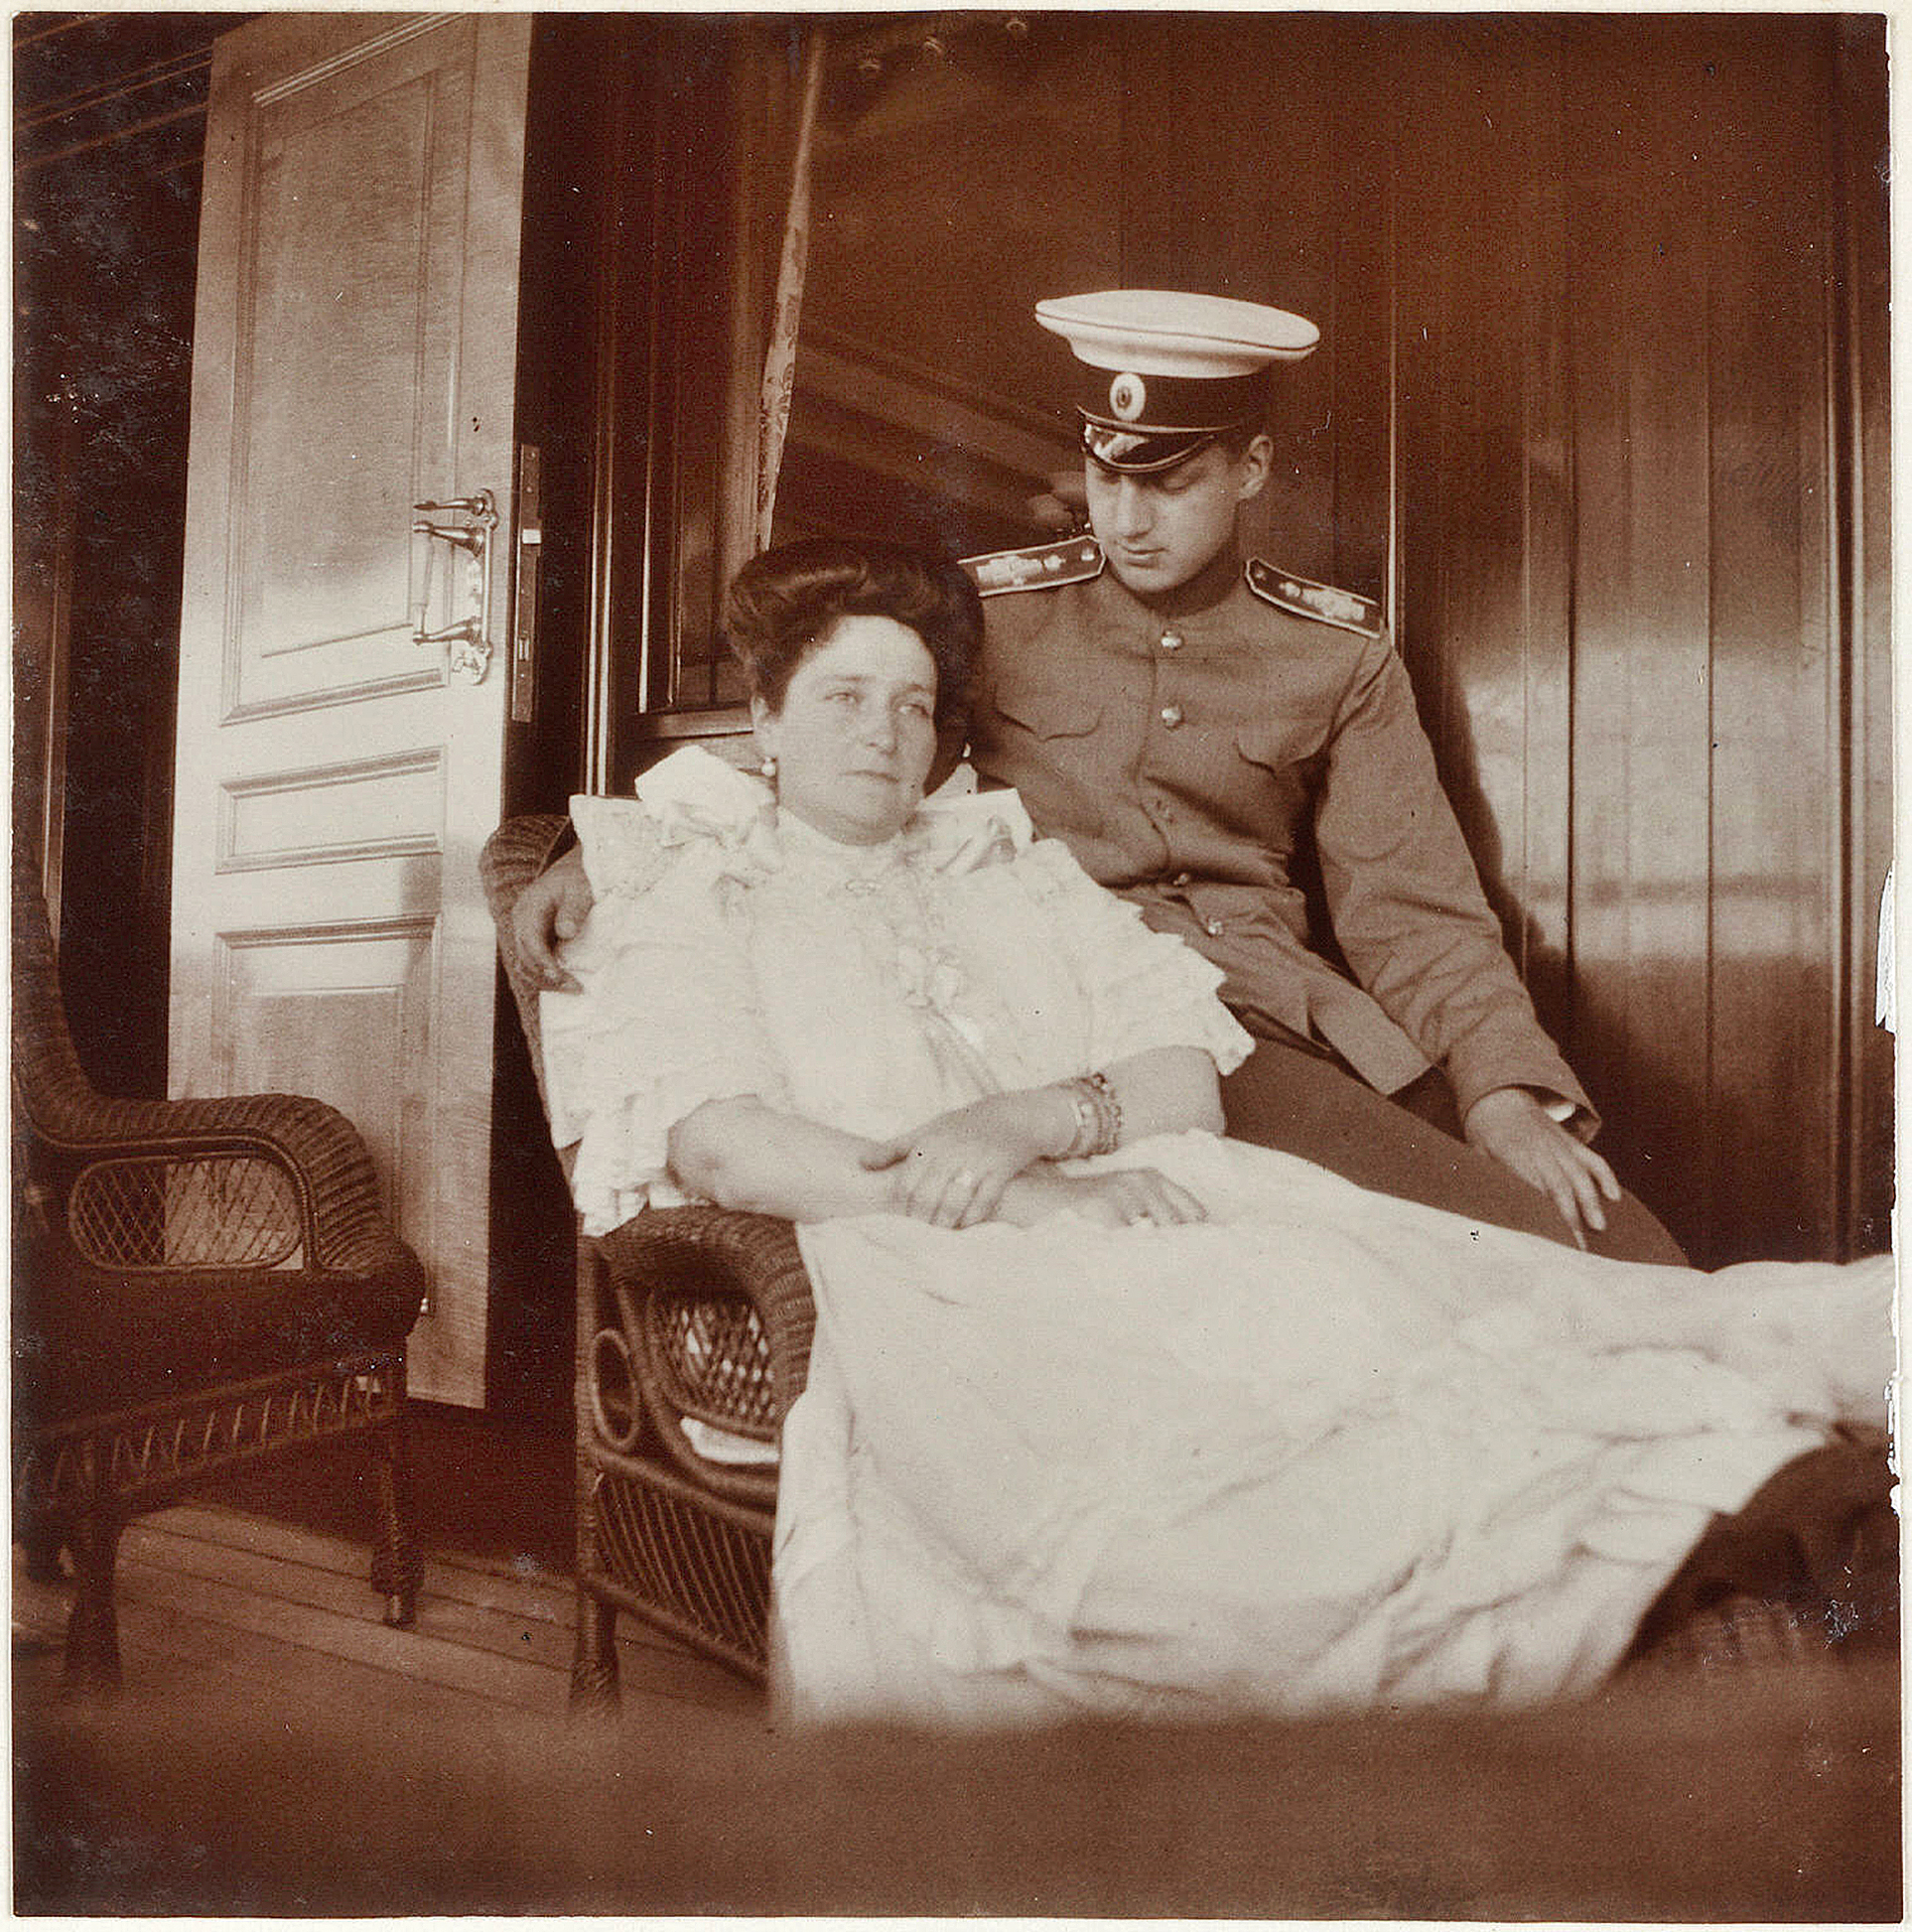 Grand Duke Dmitri on board the yacht Standard in the company of Empress Alexandra Fyodorovna, 1909. The empress was always very affectionate towards her relative Grand Duke Dmitri, who was the same age as her daughters.